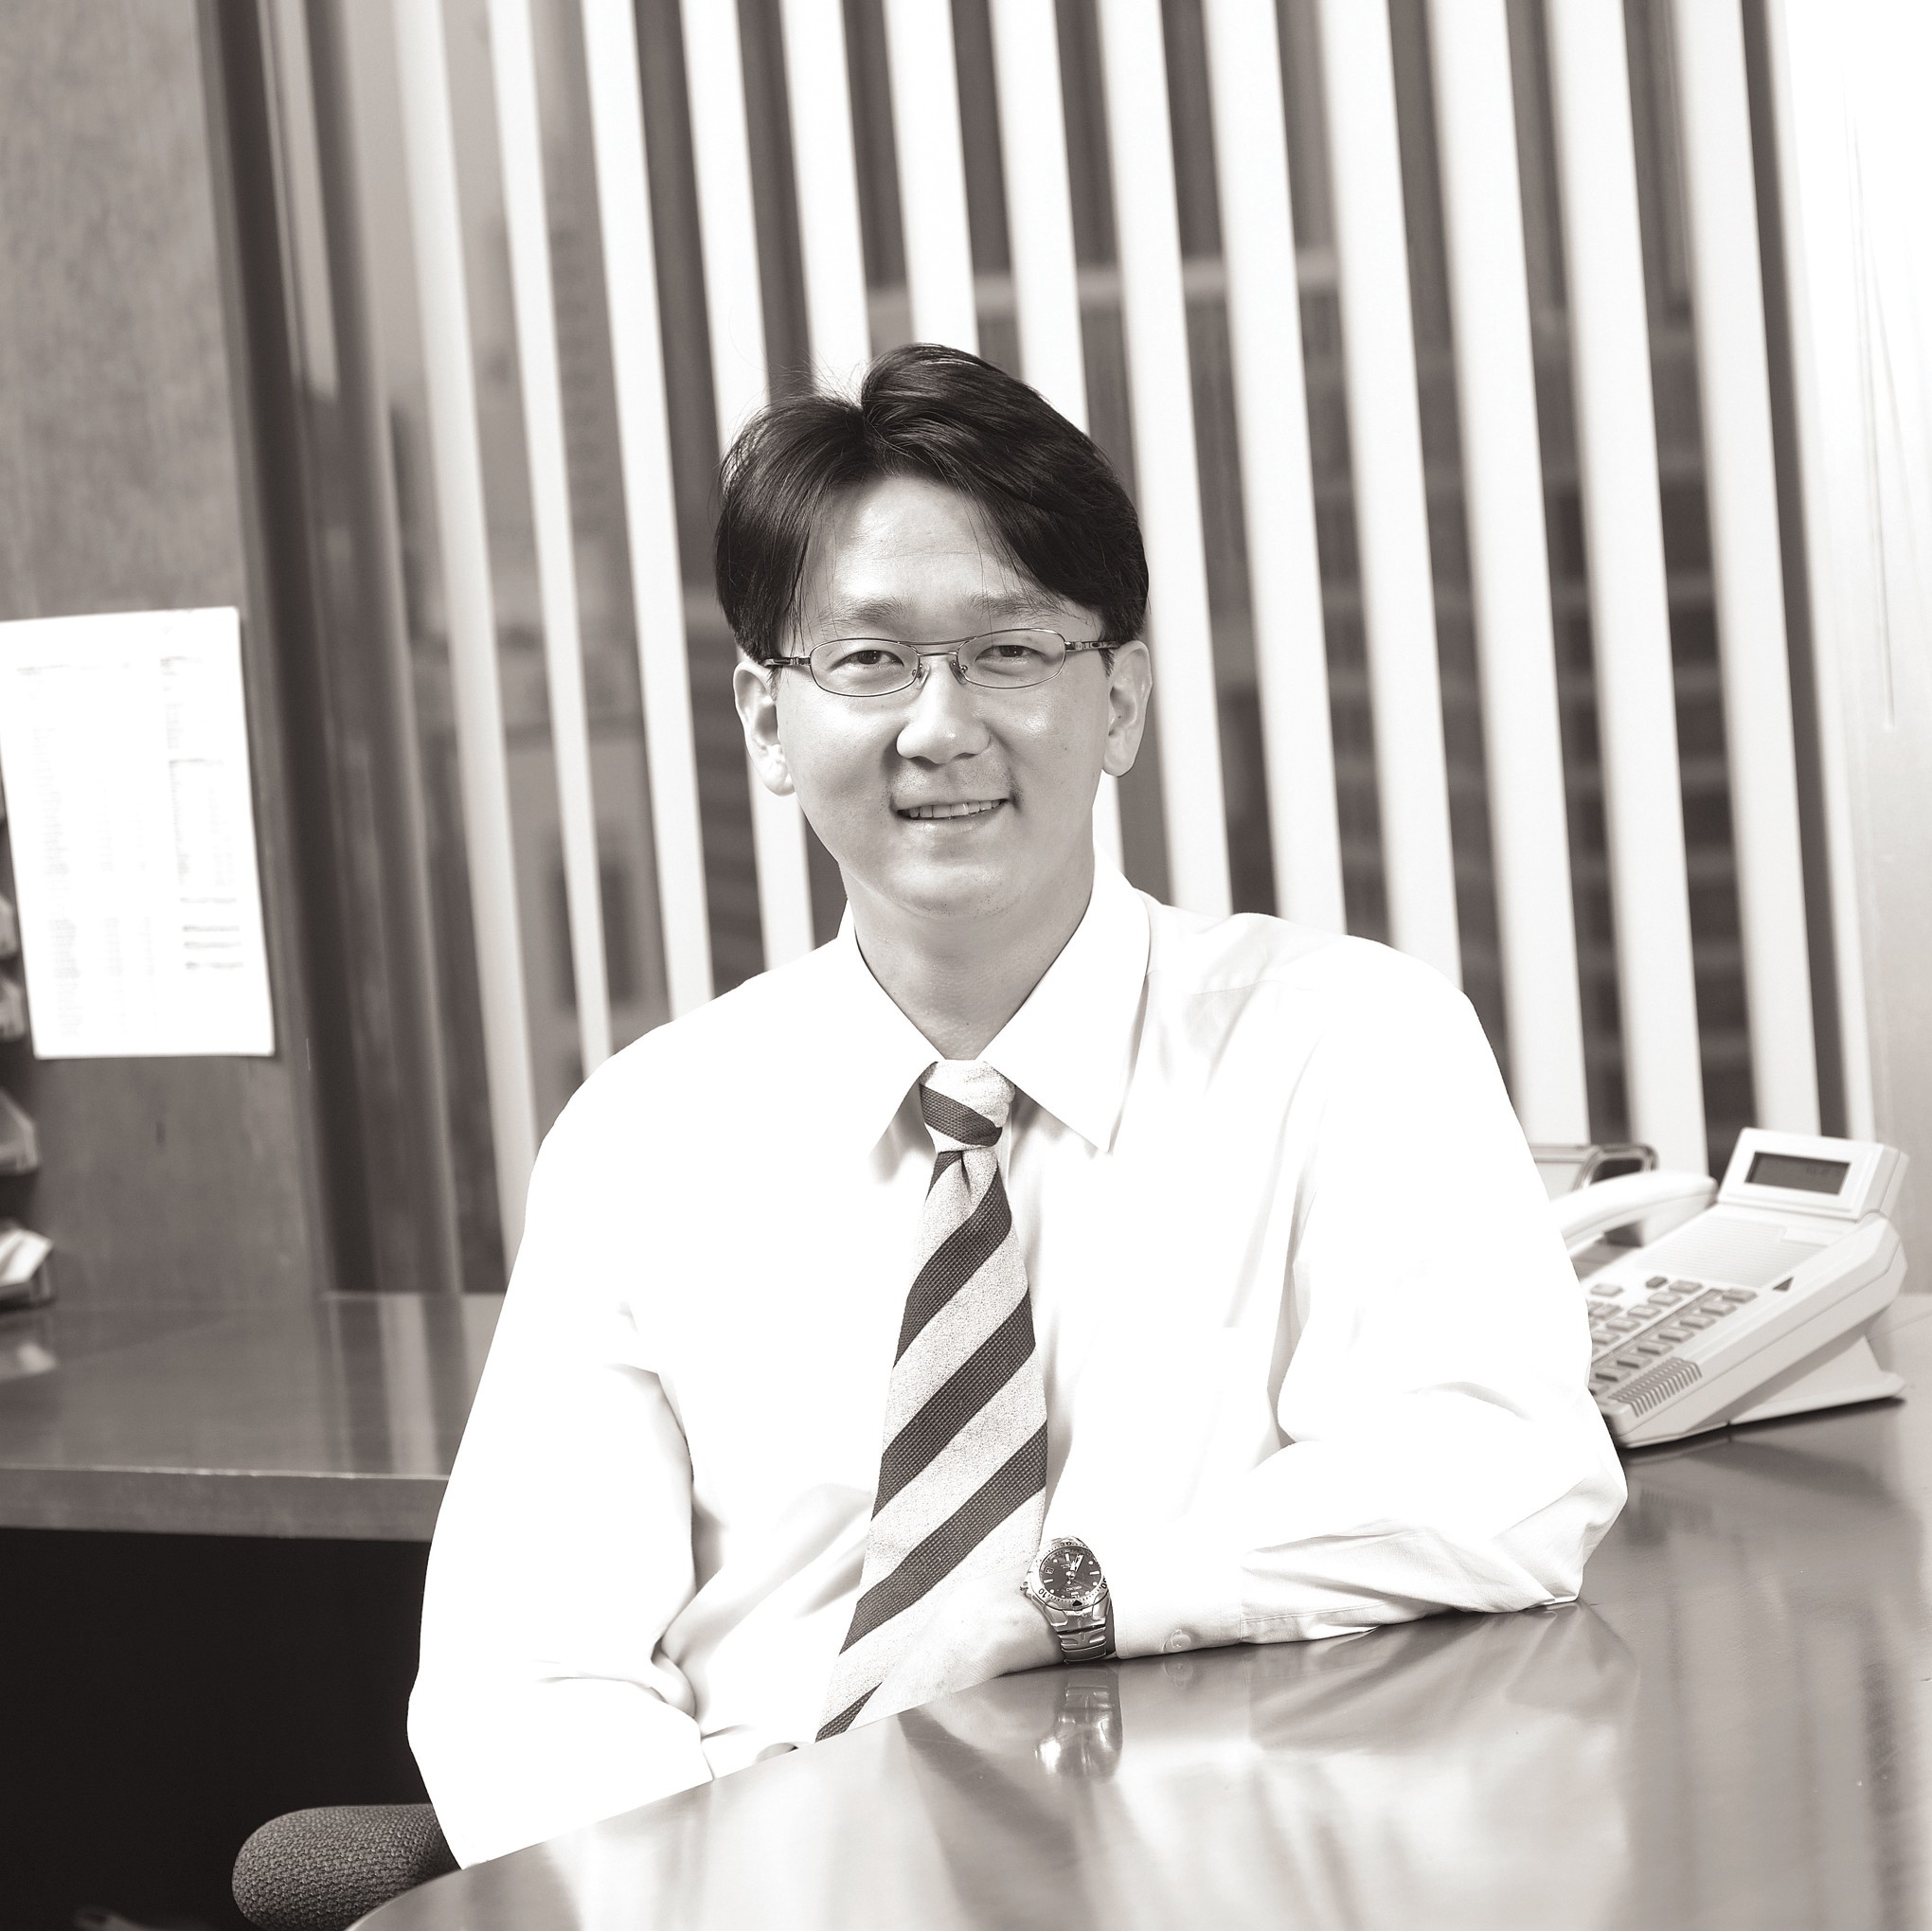 CEO Jang Il-jun, who joined GigaLane last year, focused the firm on two core businesses and revived its profits.